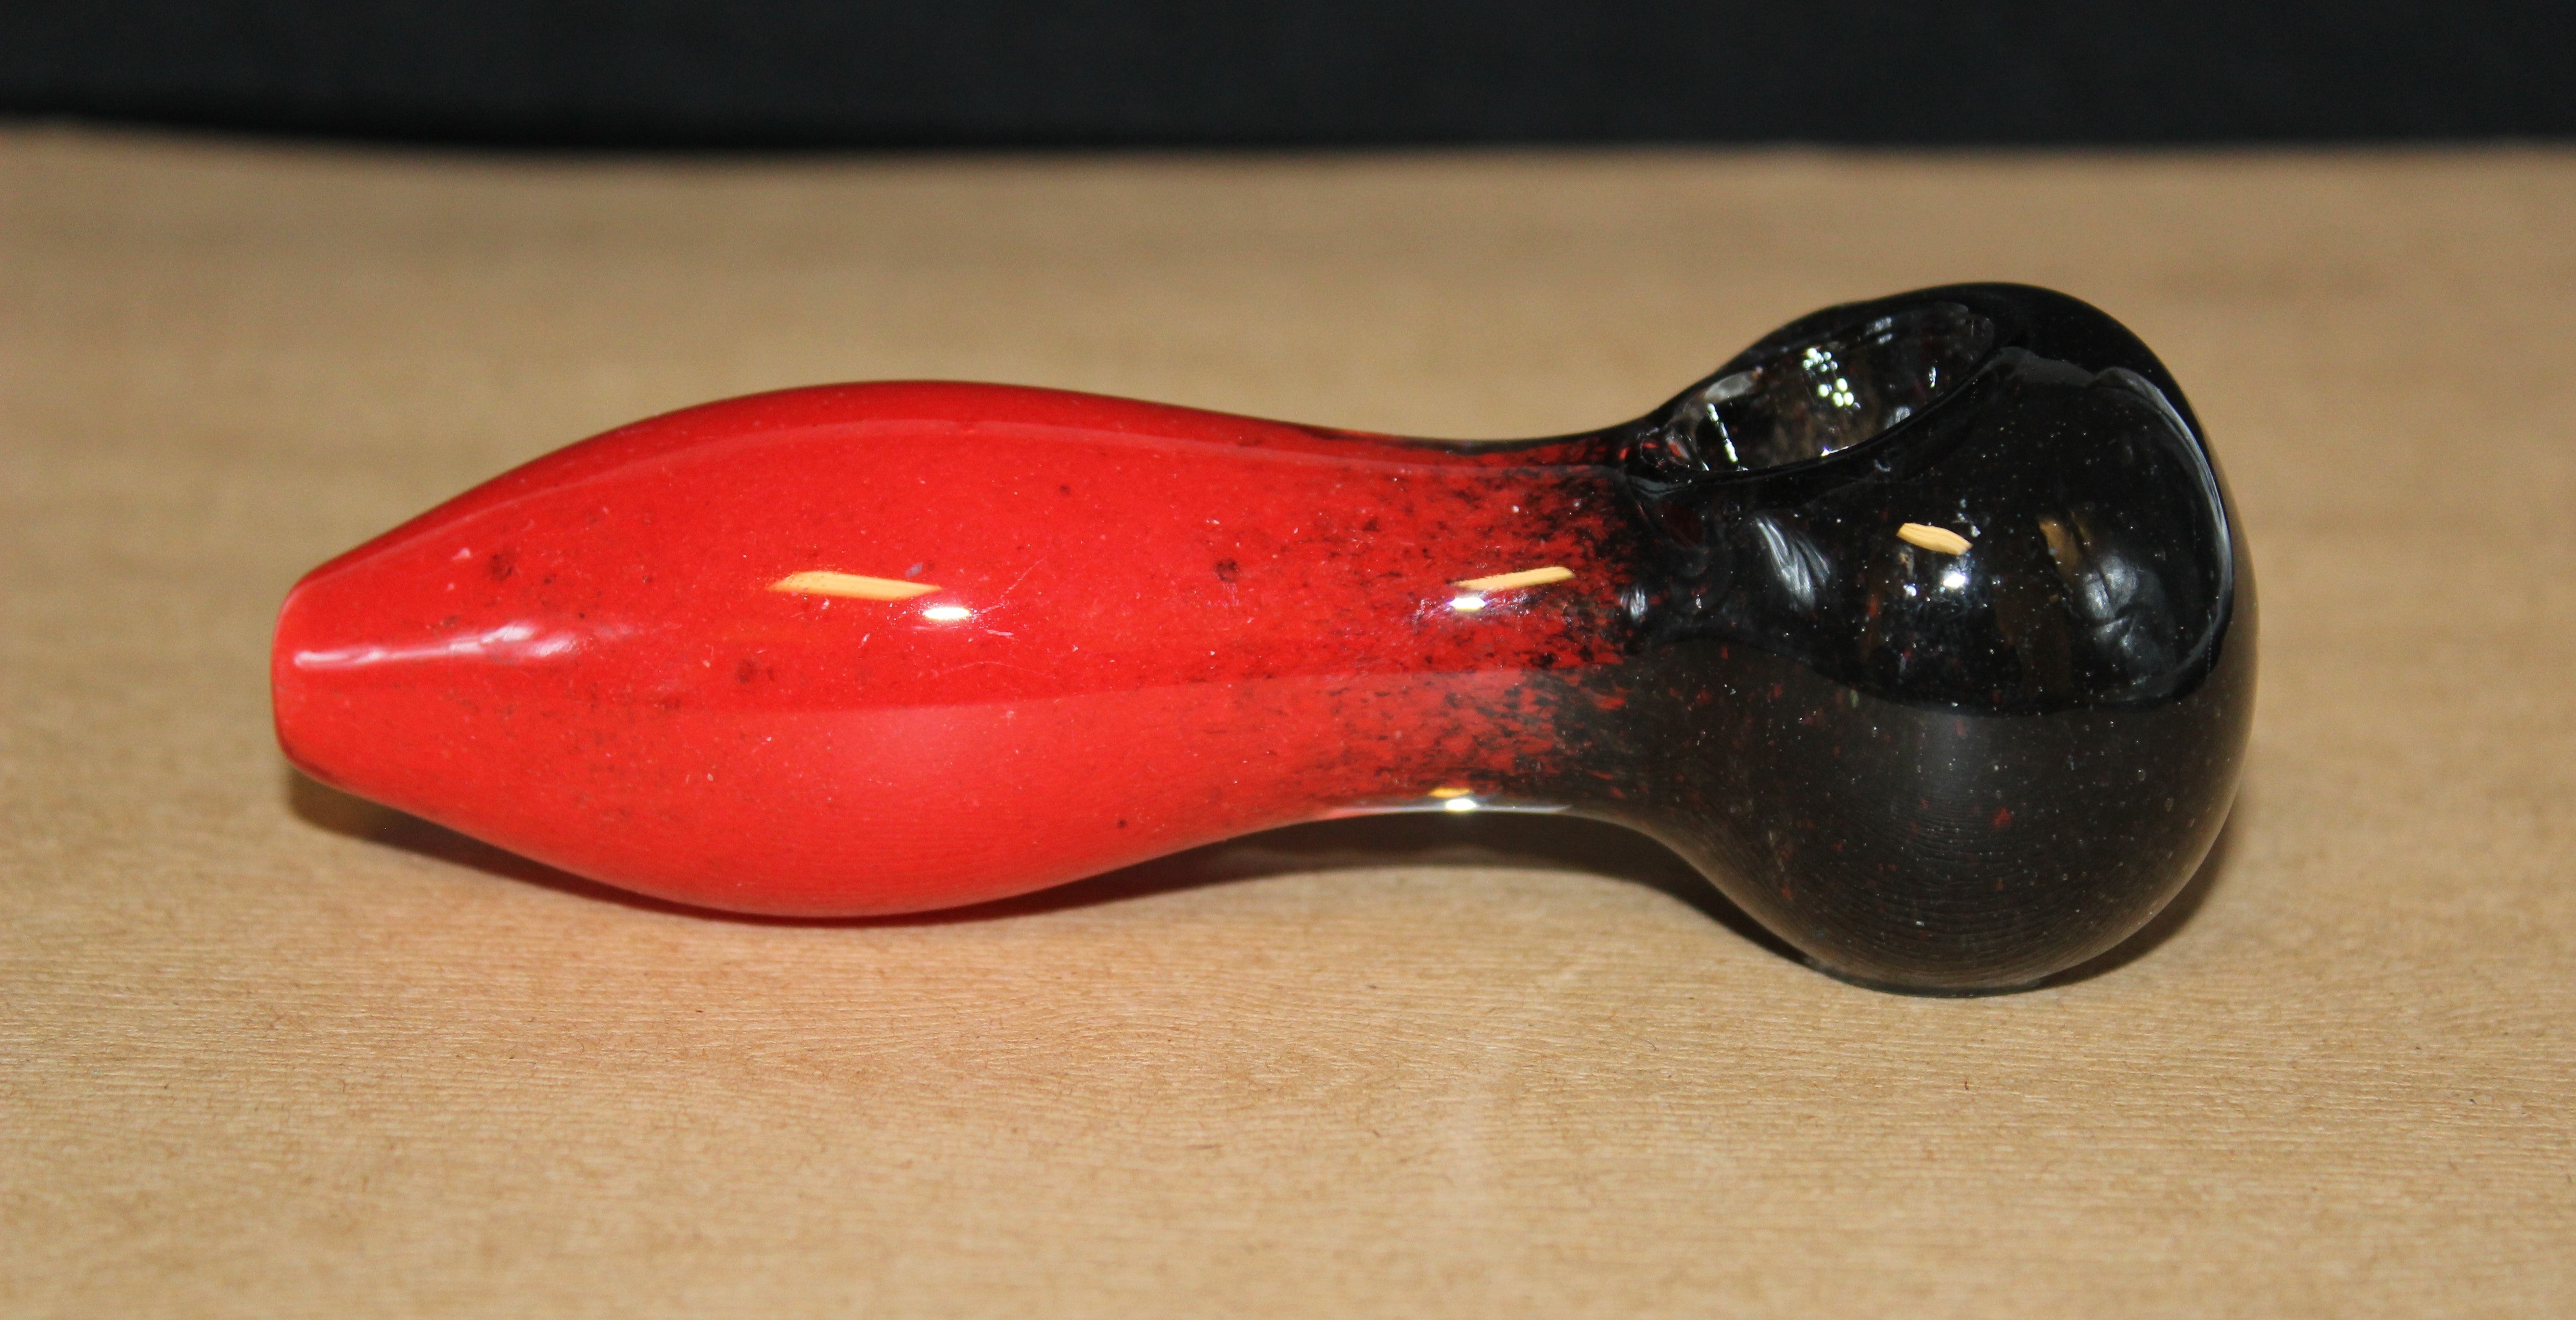 FLAMING EIGHT BALL 4 1/2" Tobacco Smoking Glass Pipe TORPEDO GLASS pipes